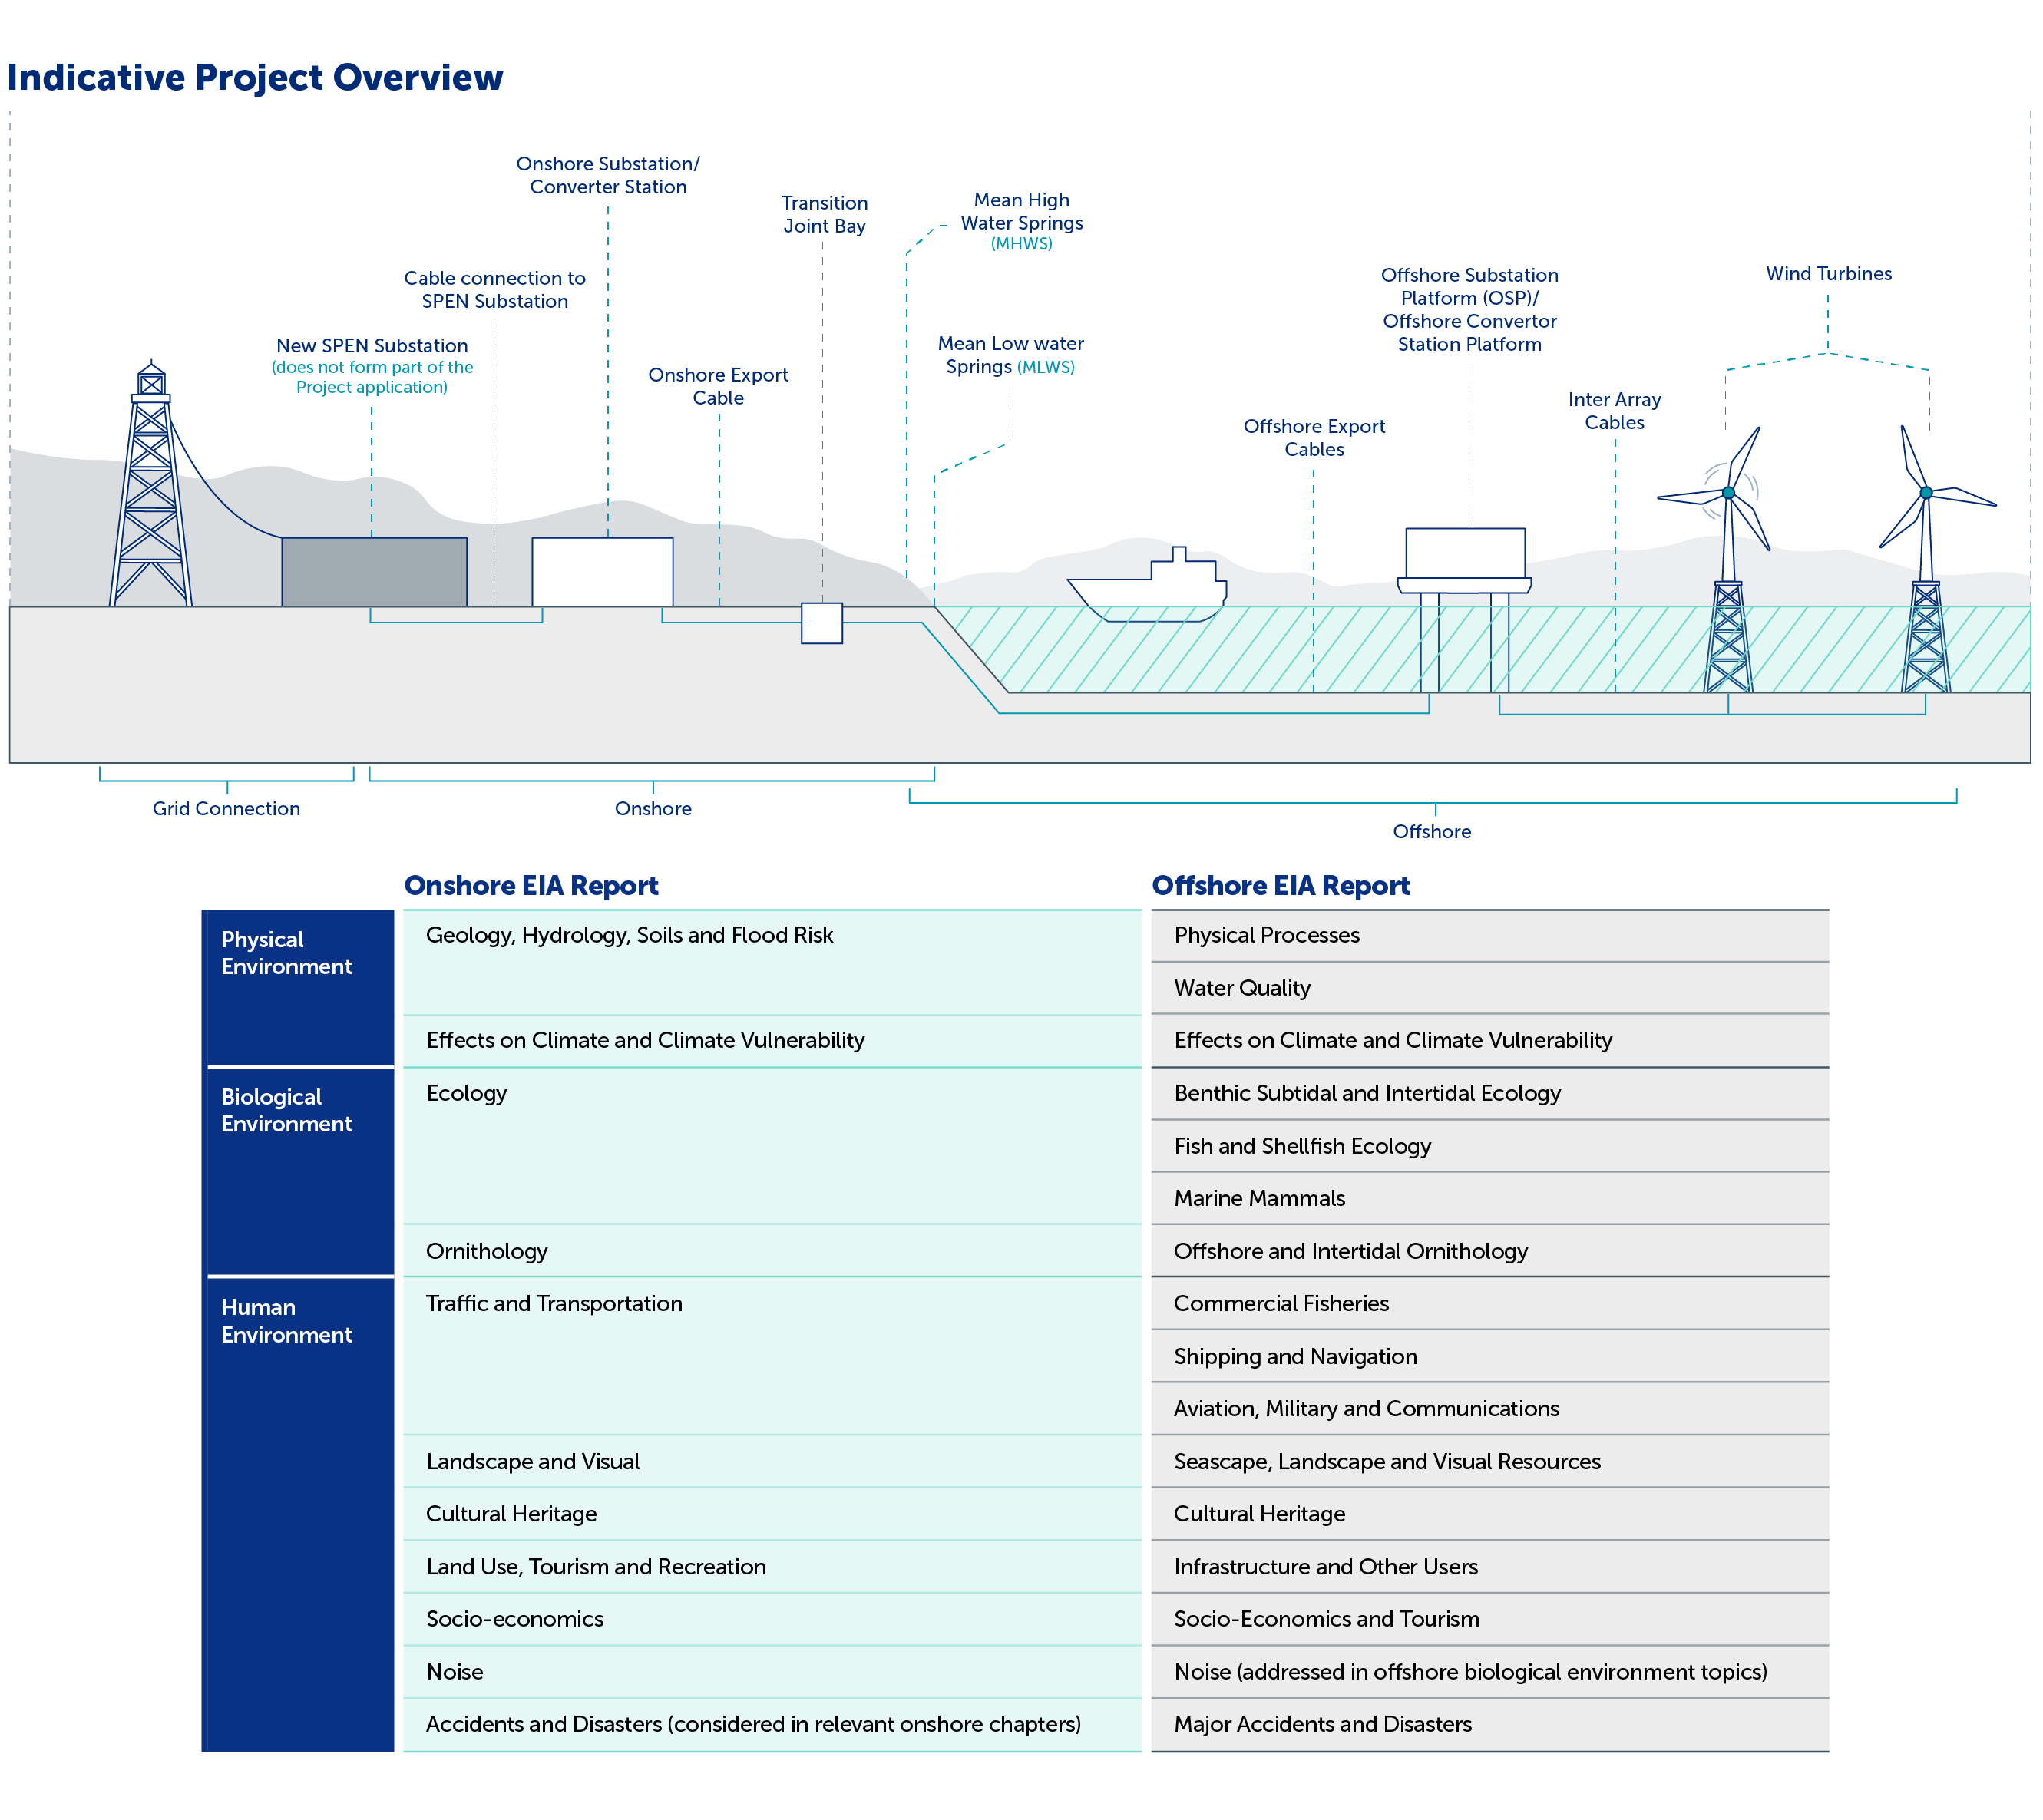 Diagram showing parts of the scheme and a list of reports